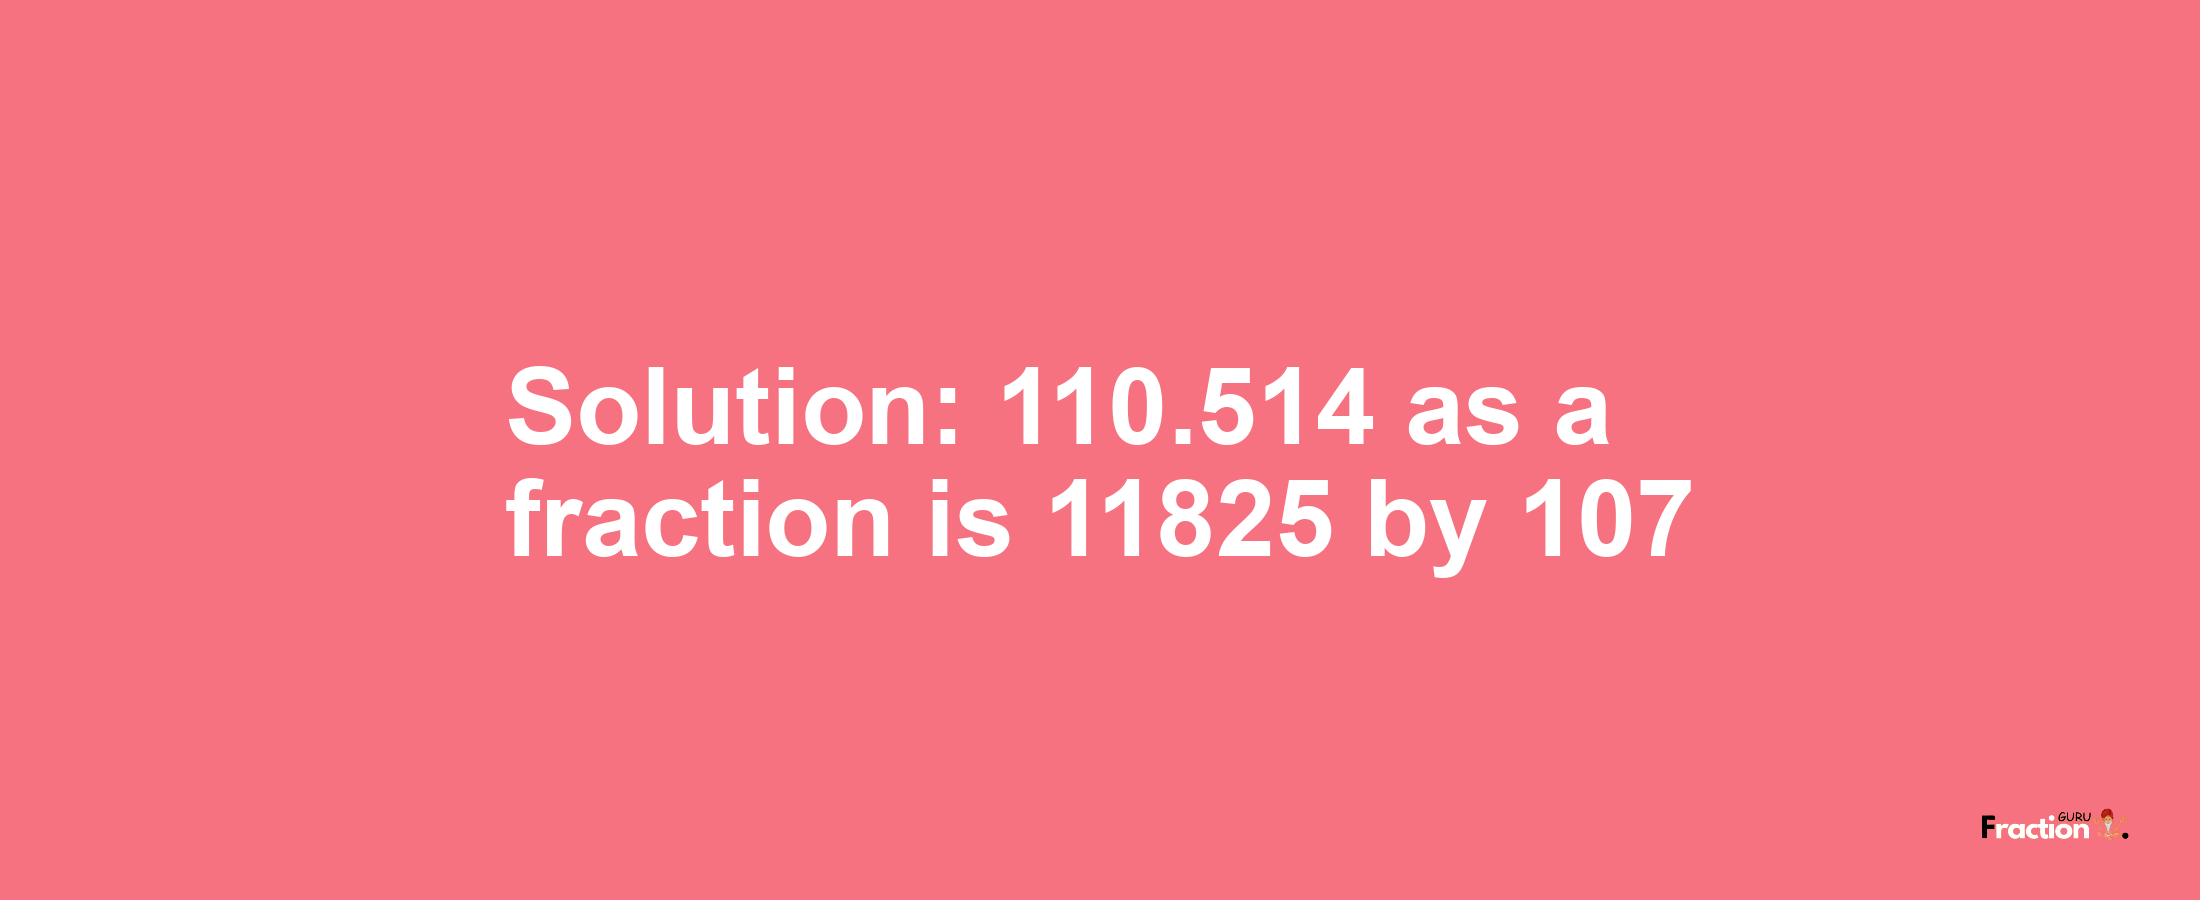 Solution:110.514 as a fraction is 11825/107